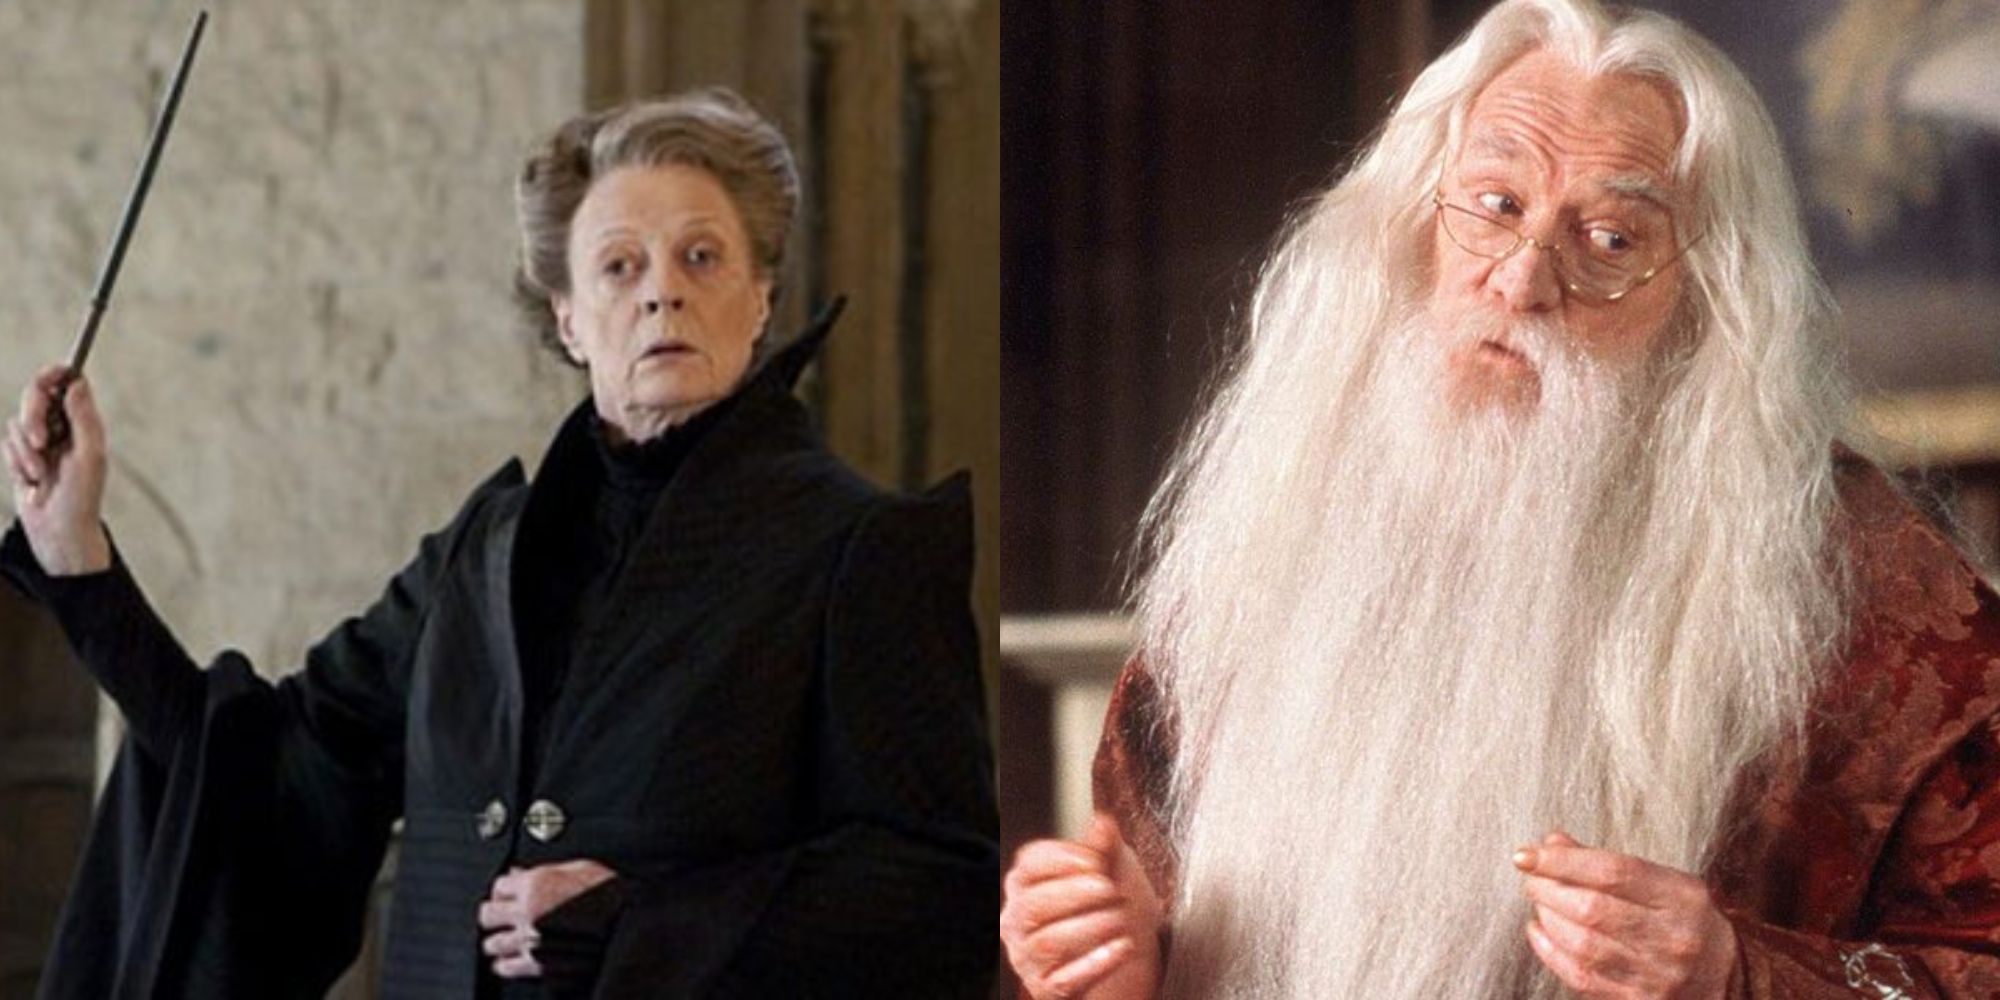 Split image showing Maggie Smith and Richard Harris in Harry Potter.